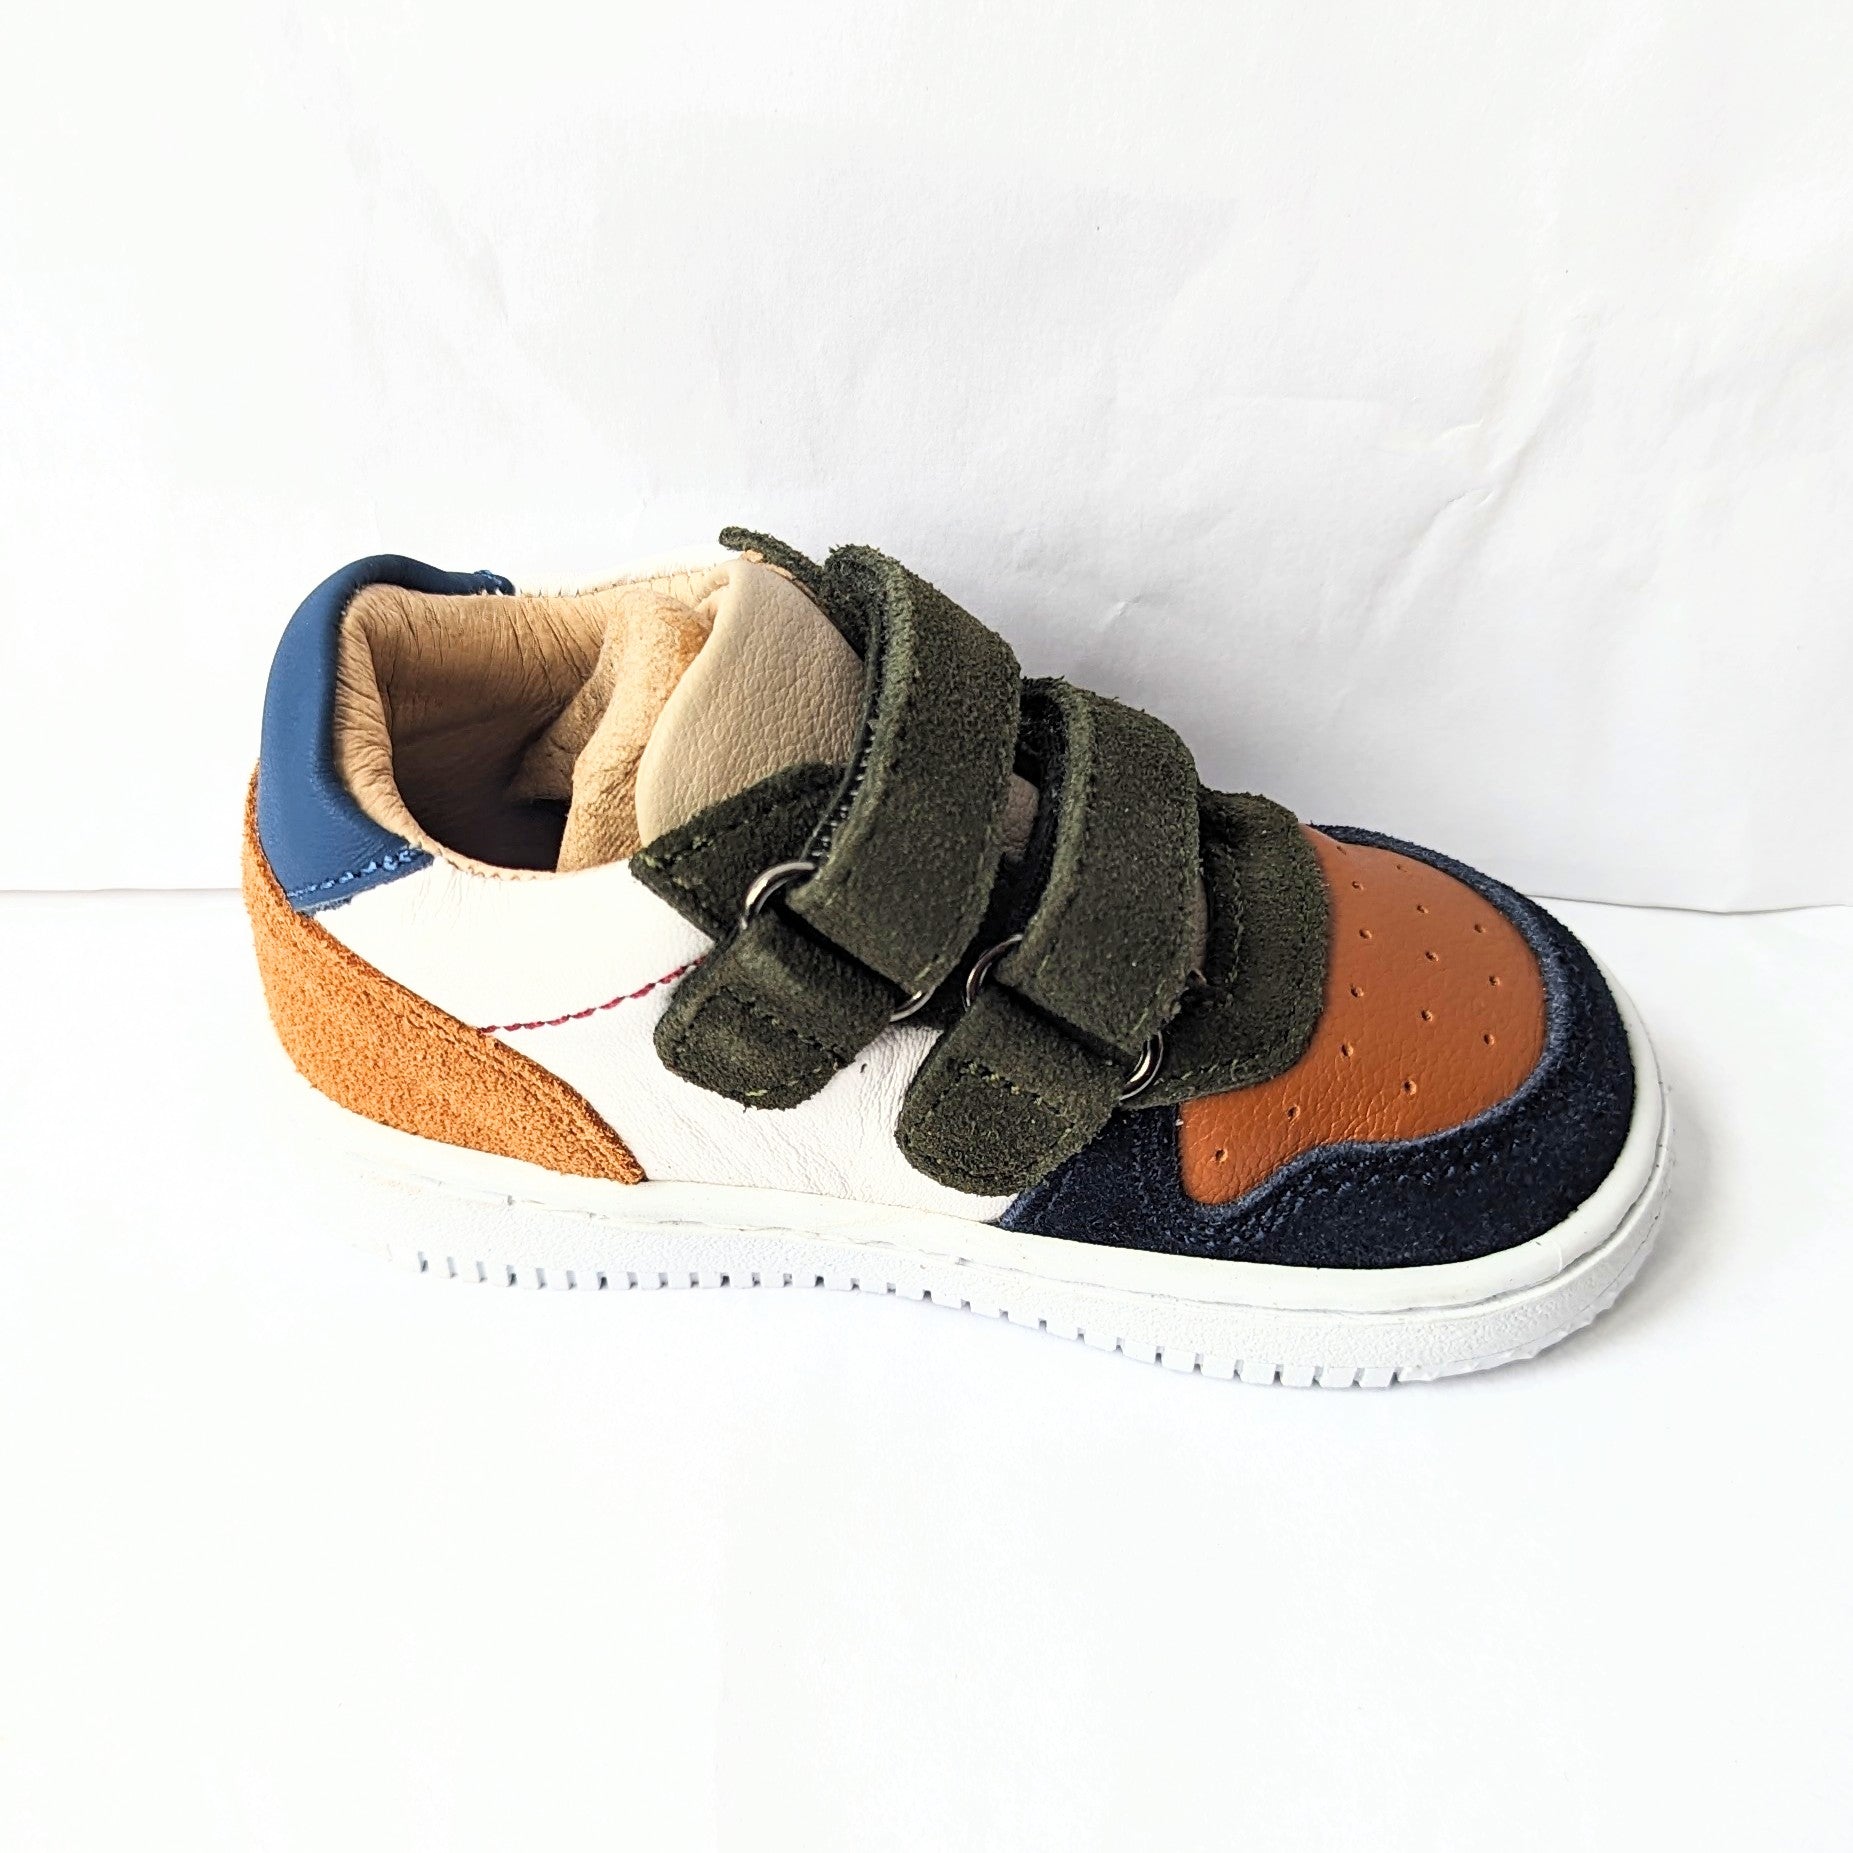 A boys trainer by Shoesme, style BN23W003-D, in white, green, tan and navy leather/nubuck with double velcro fastening. Left side view.